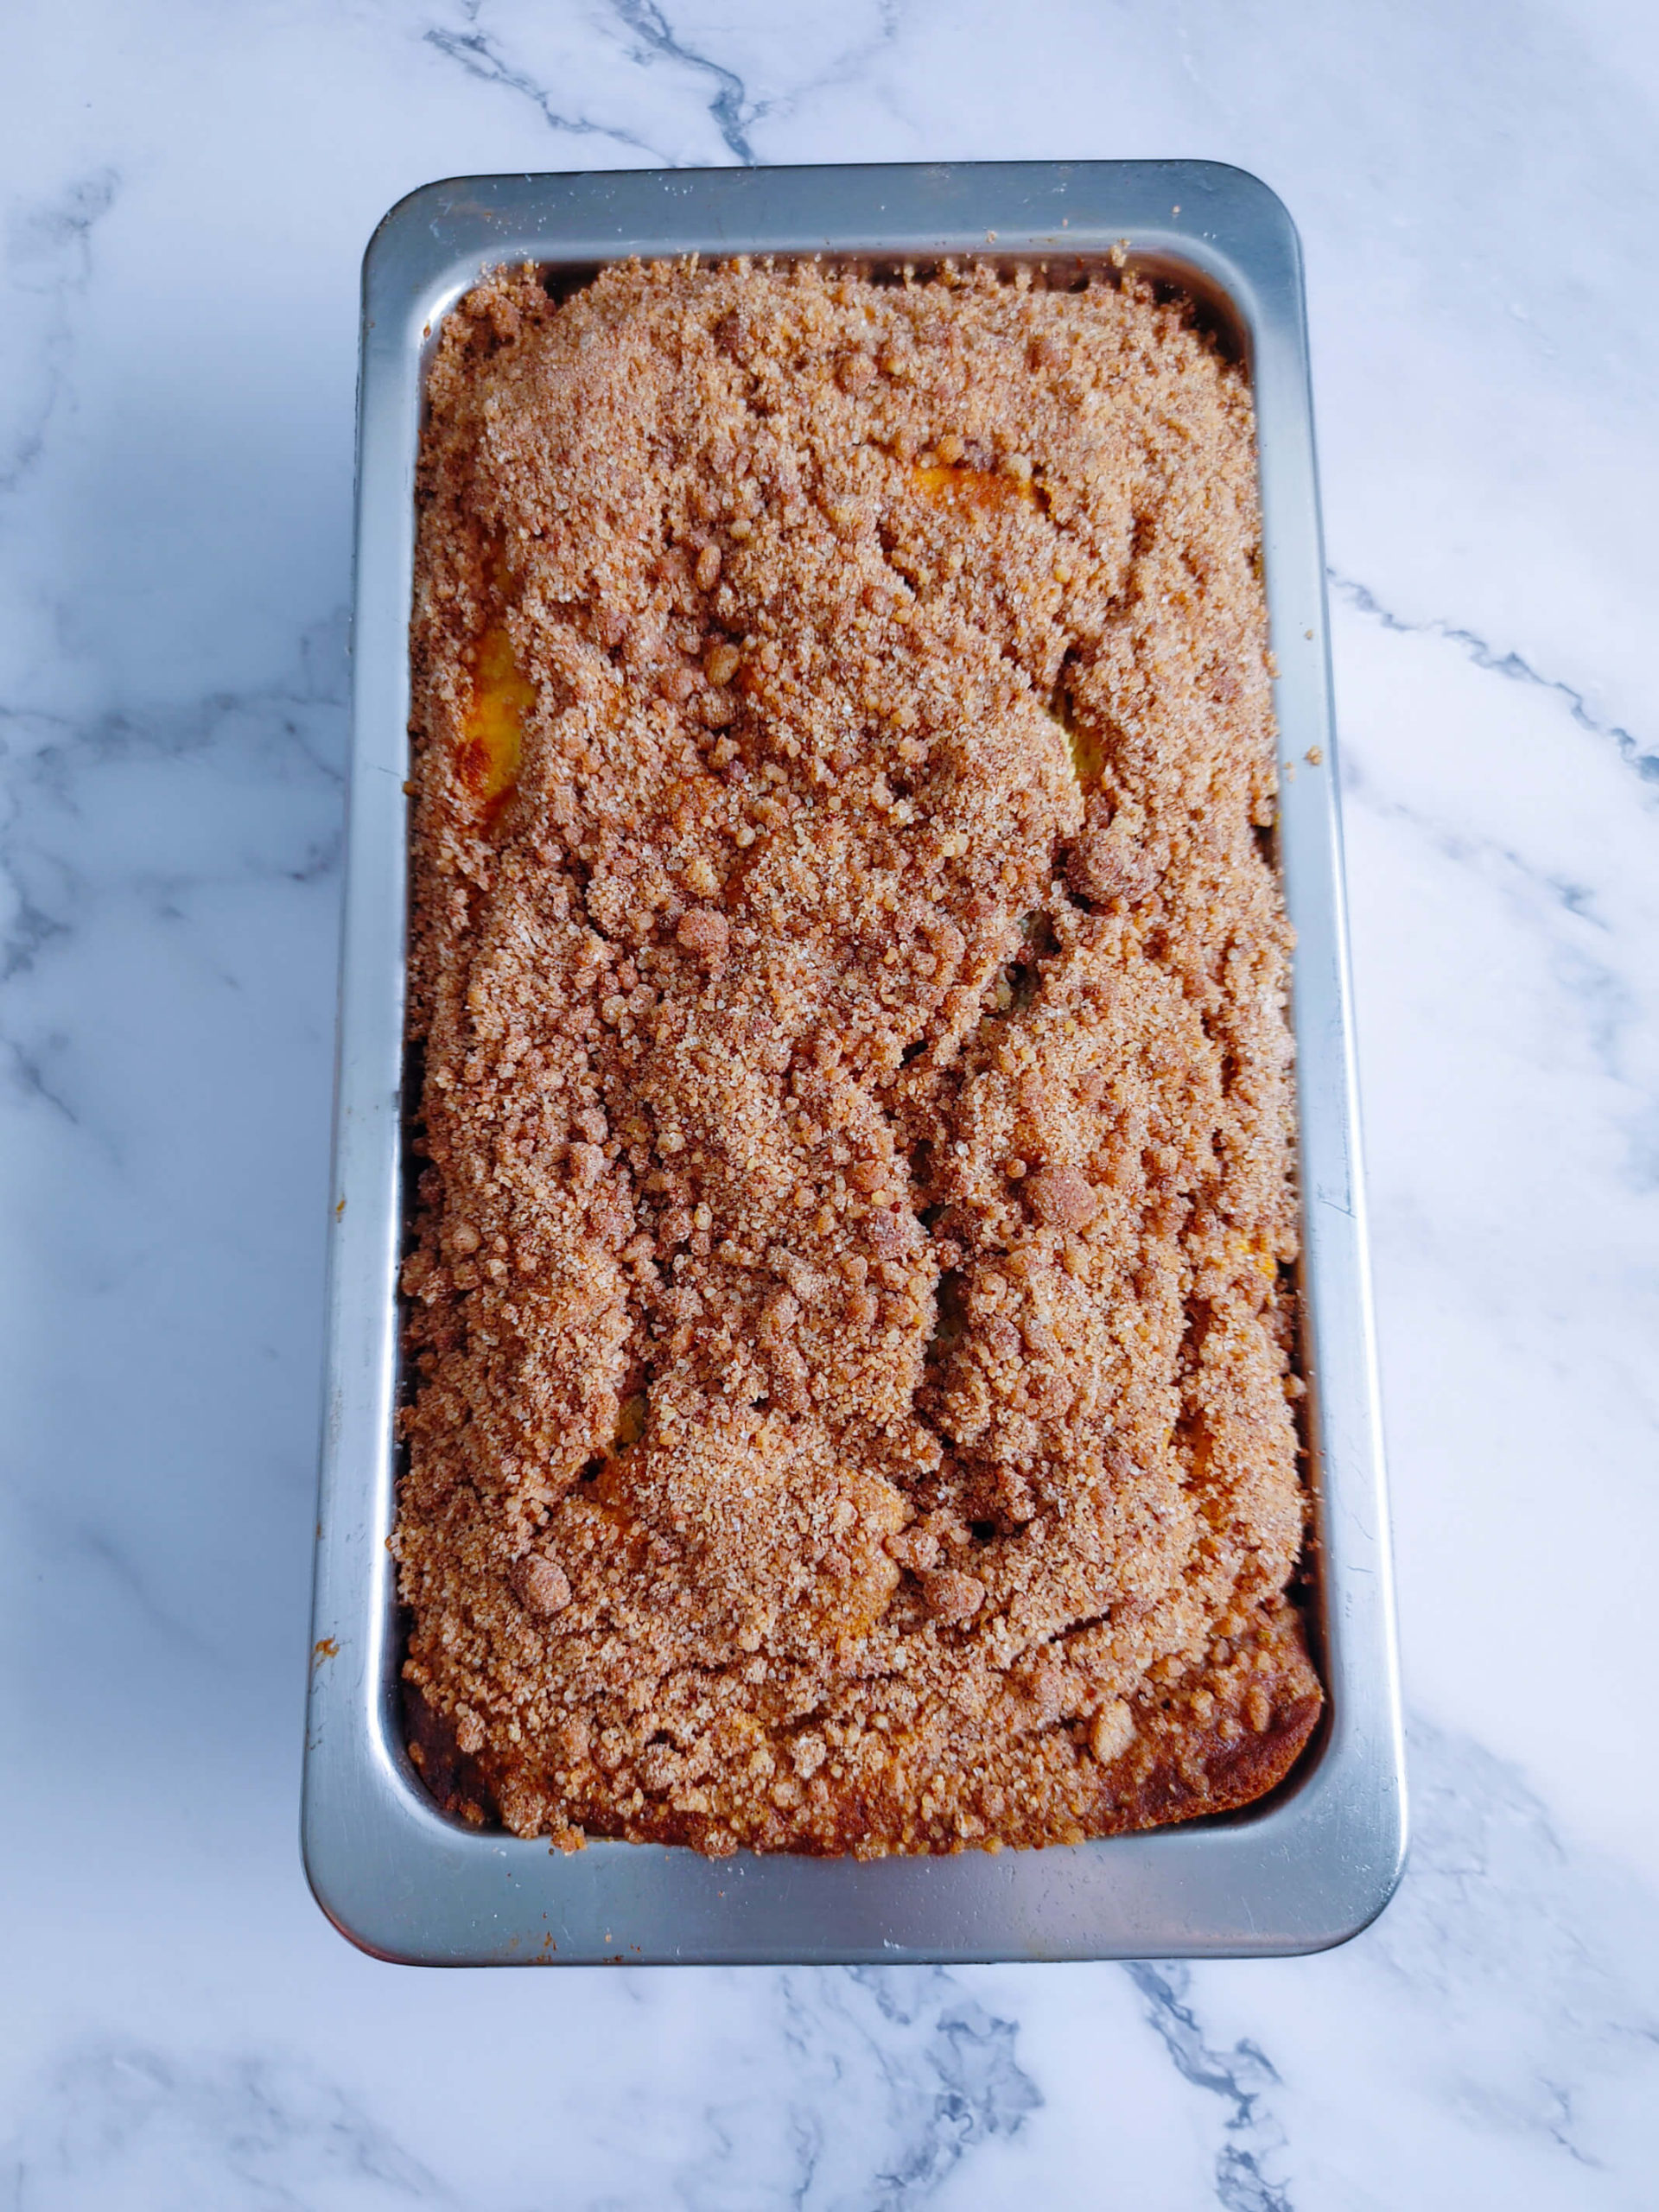 BAKED BANANA BREAD WITH CINNAMON CRUMBLE TOPPING